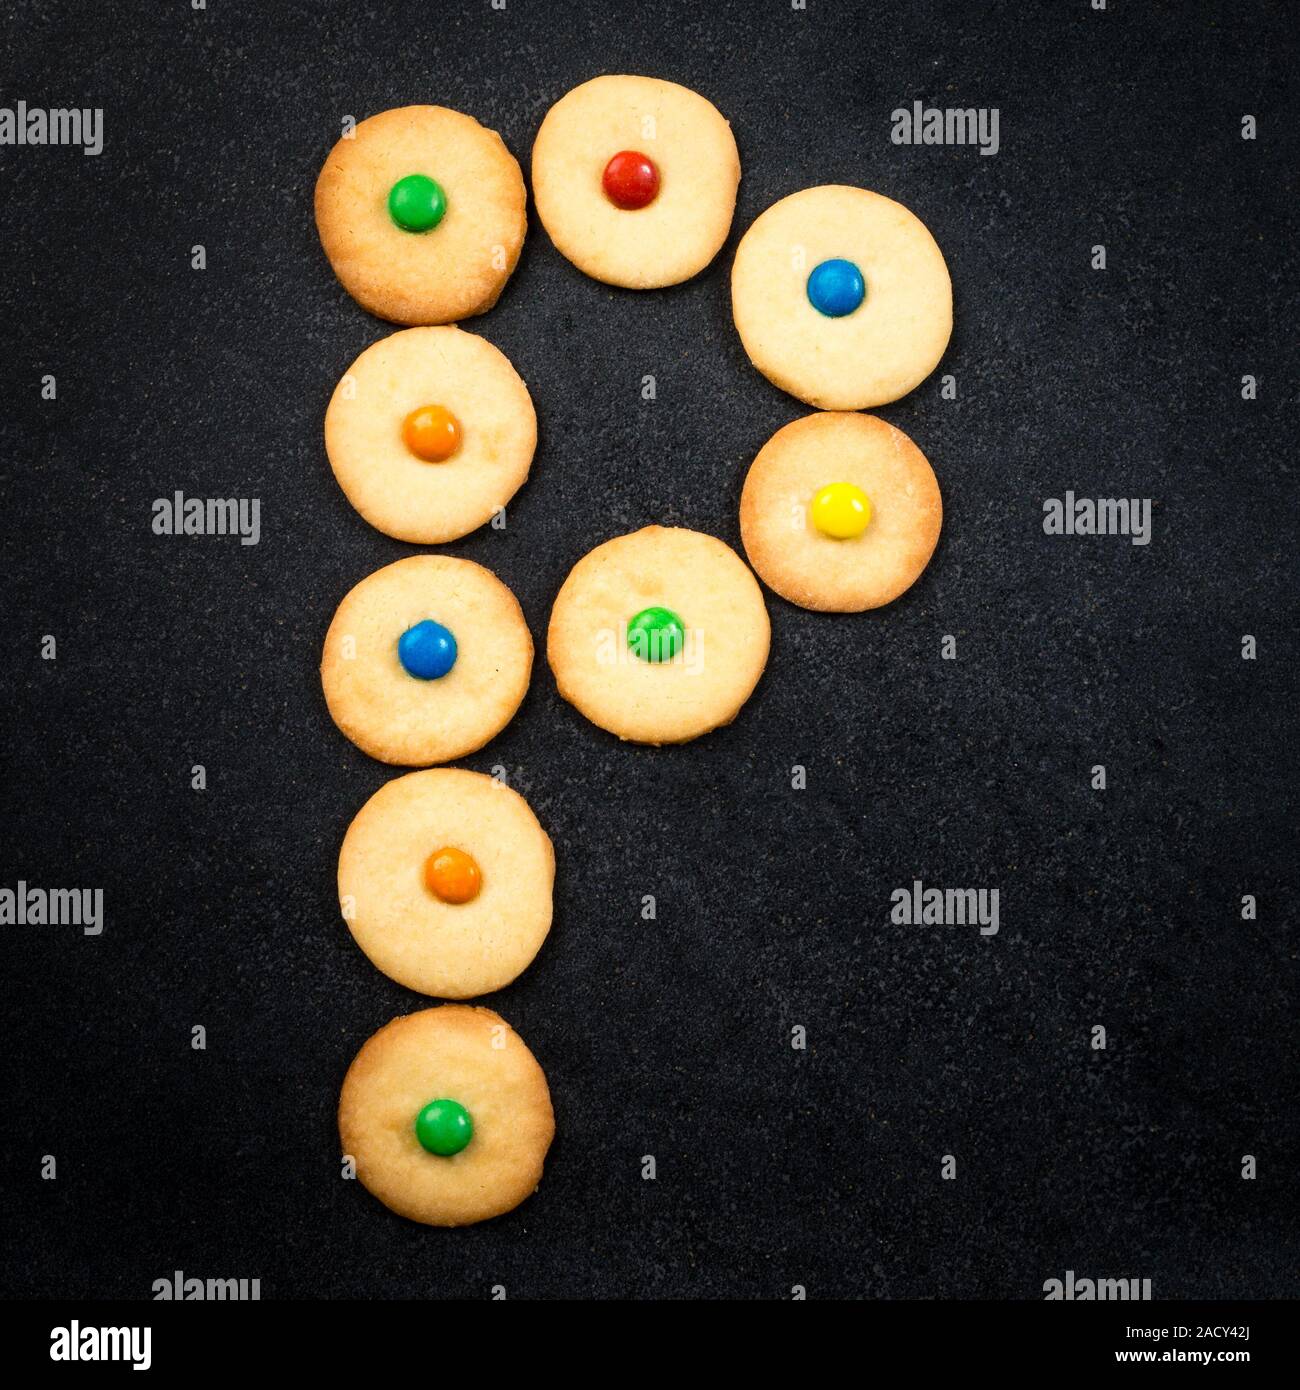 Homemade child cookies - P letter of the alphabet Stock Photo